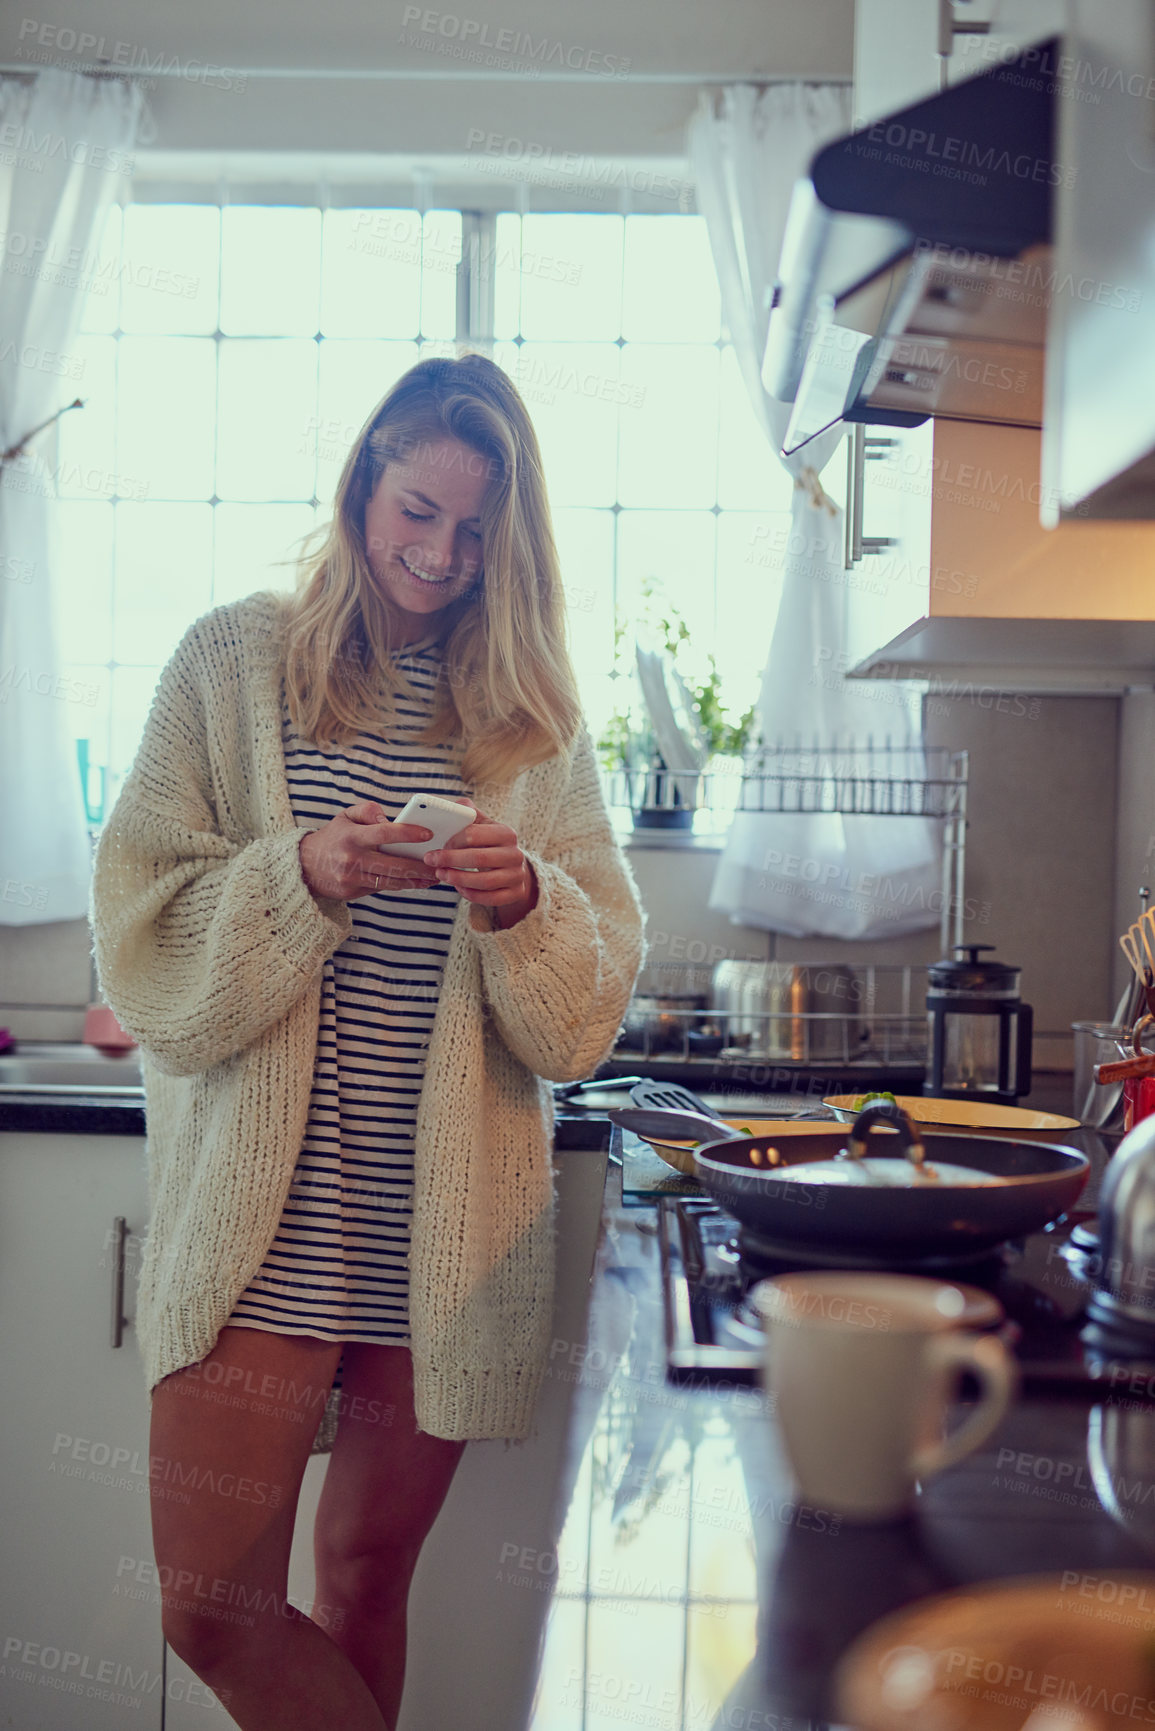 Buy stock photo Cropped shot of an attractive young woman texting on a cellphone while cooking in her kitchen